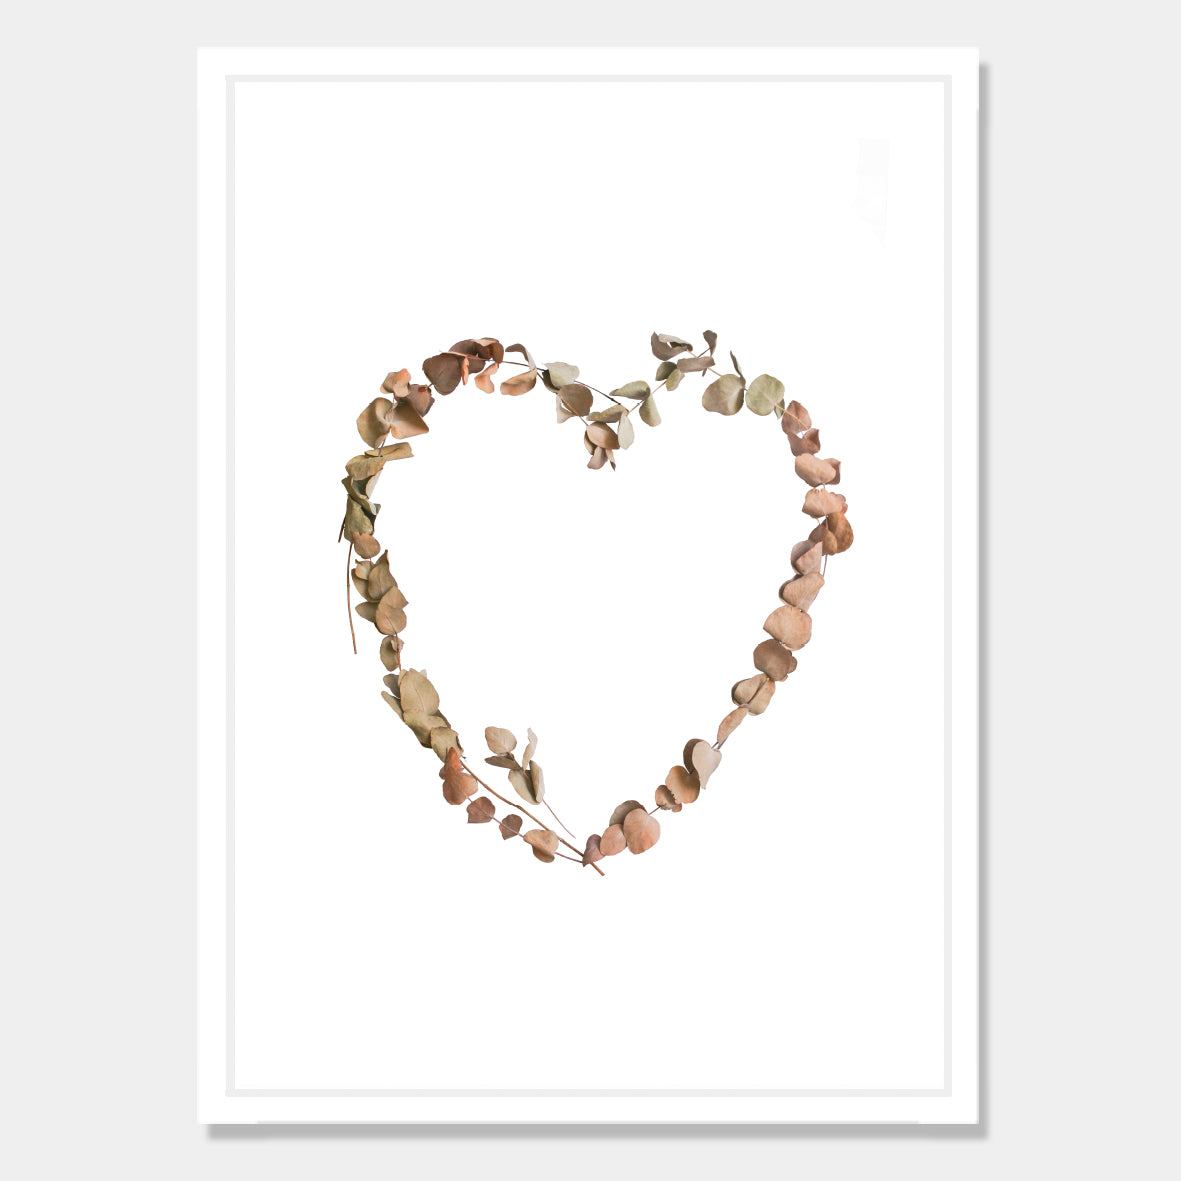 Photographic art print of dried leaves in a heart shape by Bon Jung. Printed in New Zealand by endemicworld and framed in white.